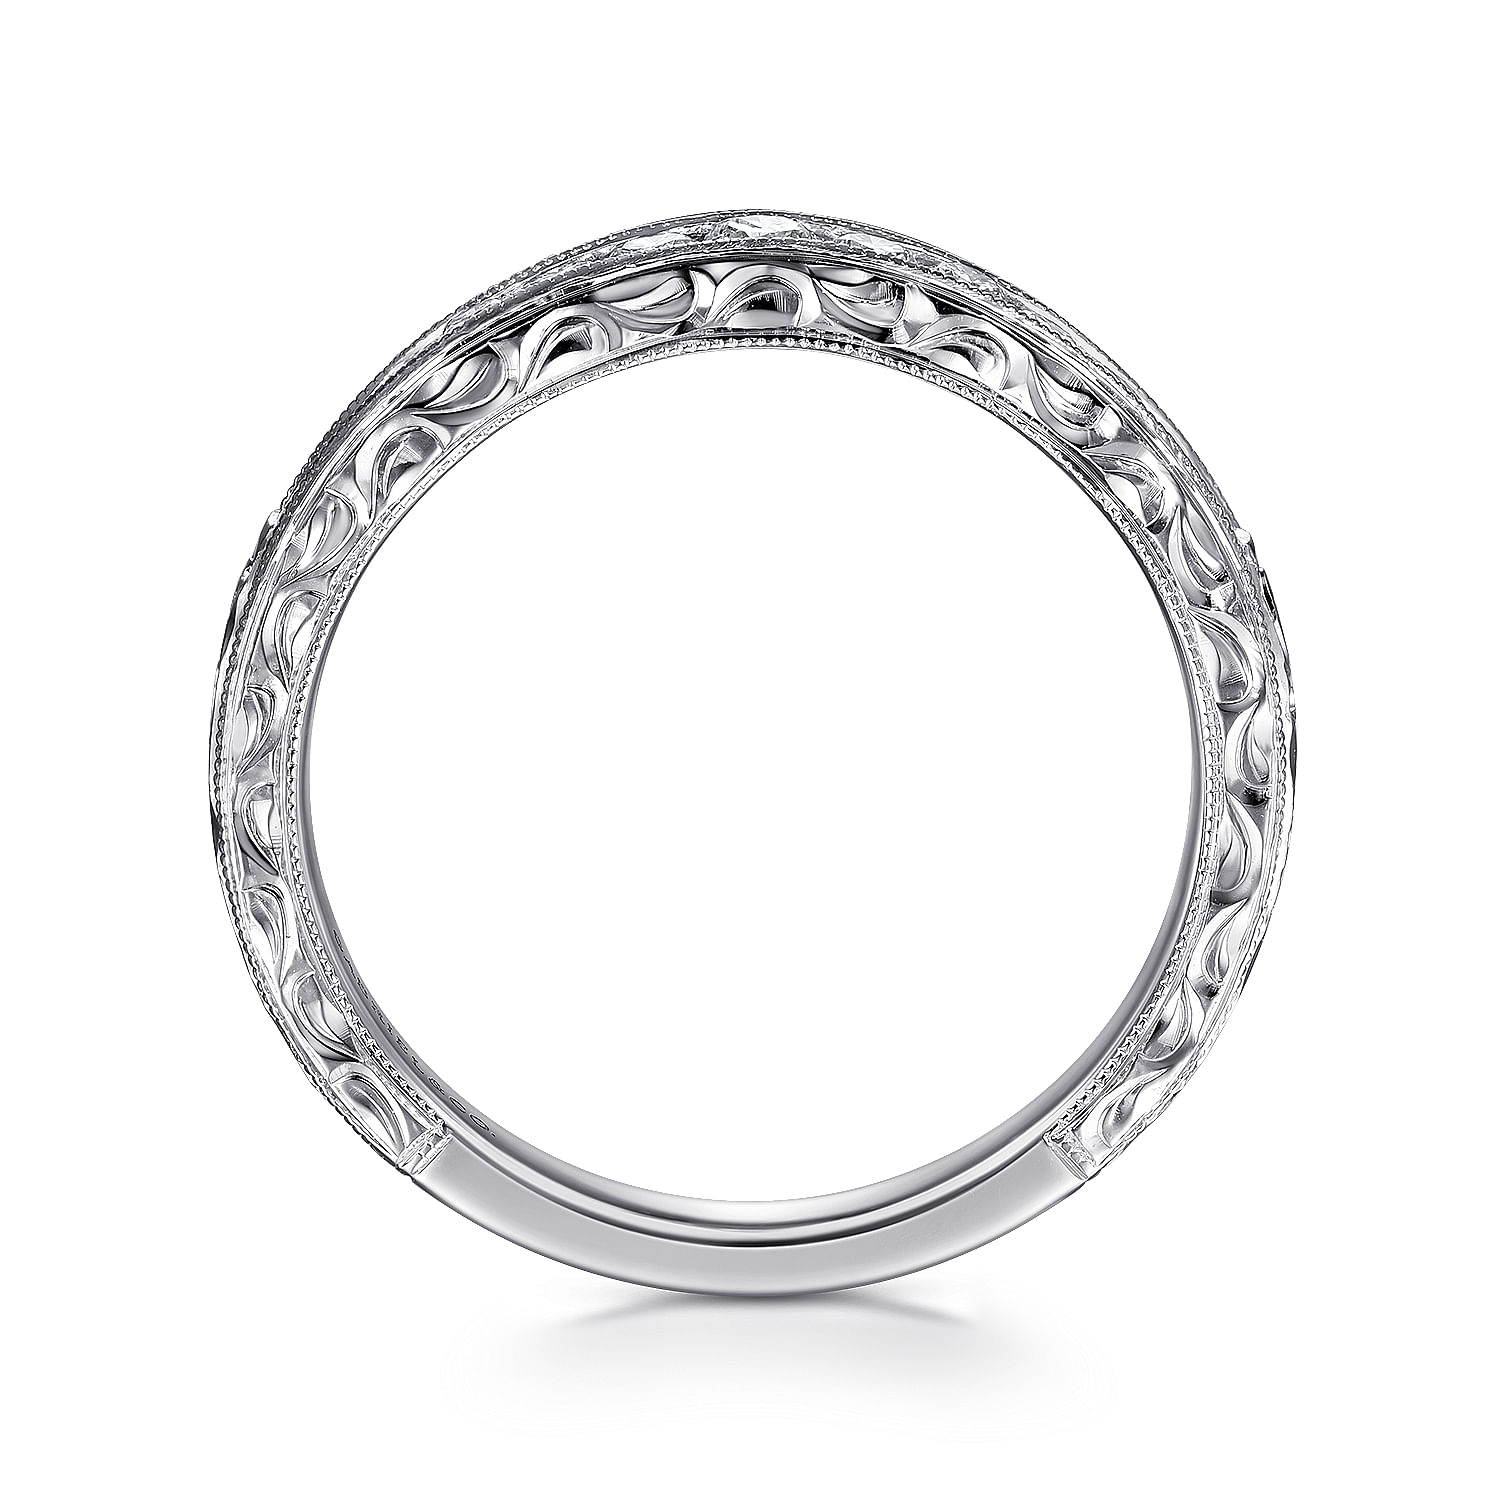 Tienne - Vintage Inspired 14K White Gold Curved Channel Set Diamond Wedding Band with Engraving - 0.25 ct - Shot 2